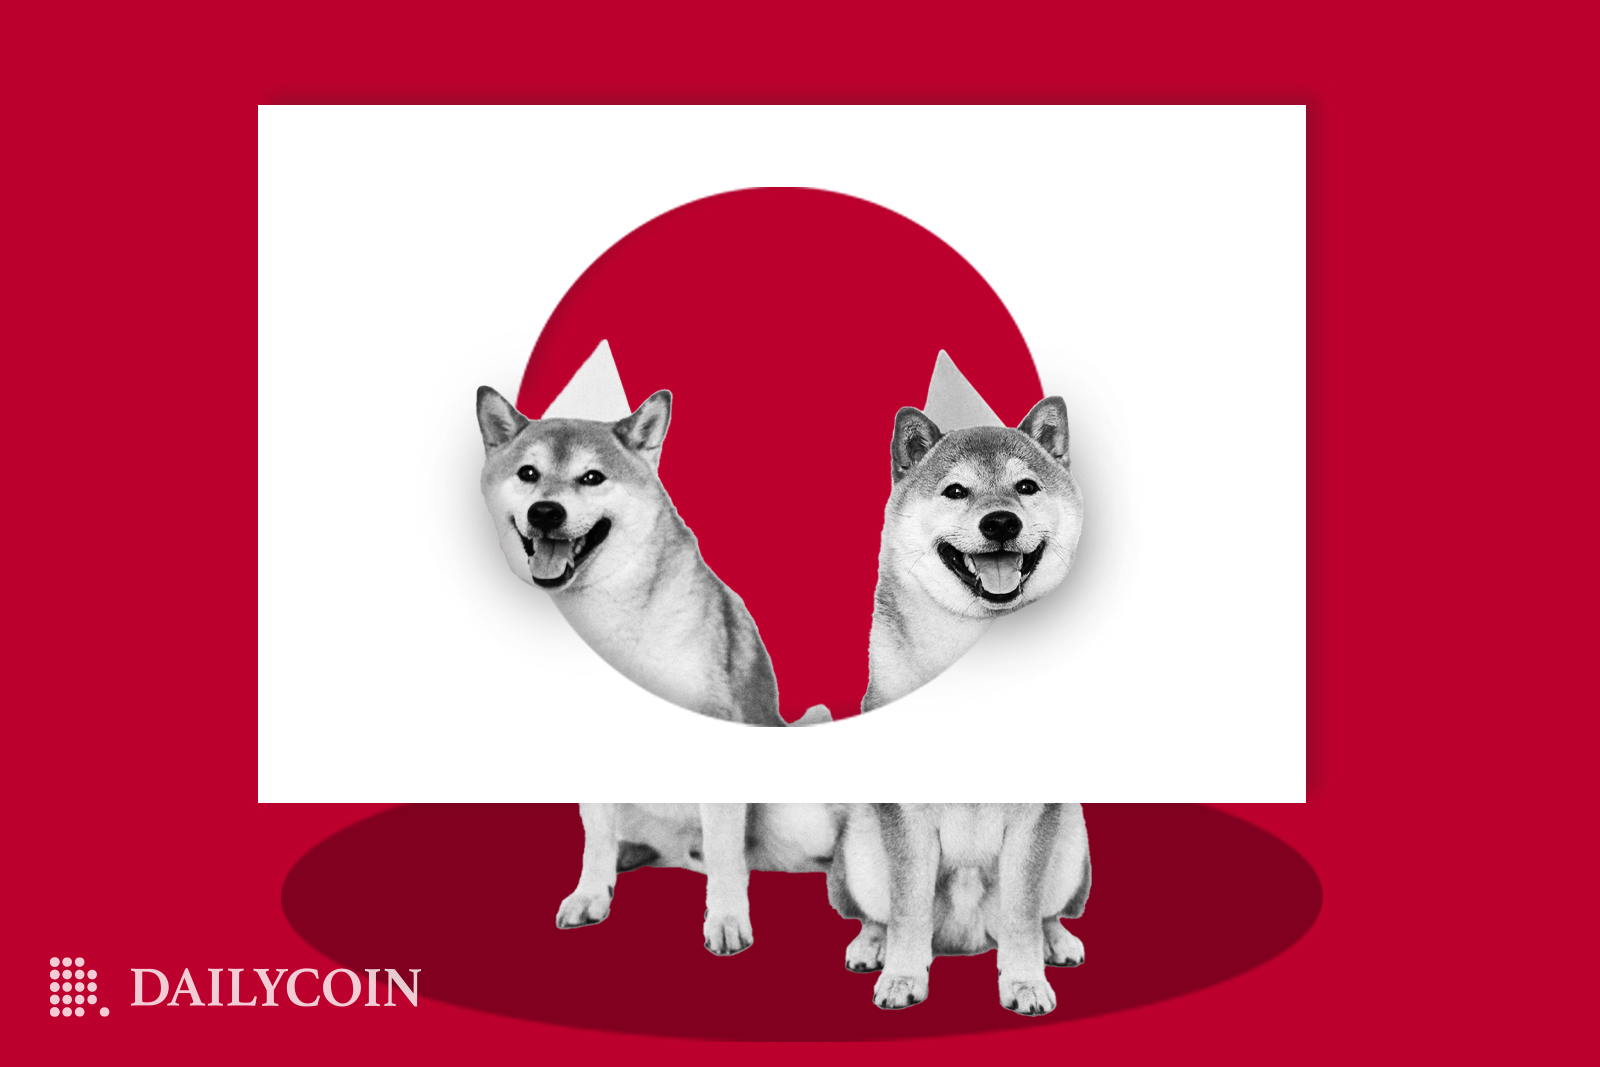 two shiba inu dogs with party hats are looking through a circle on a white board